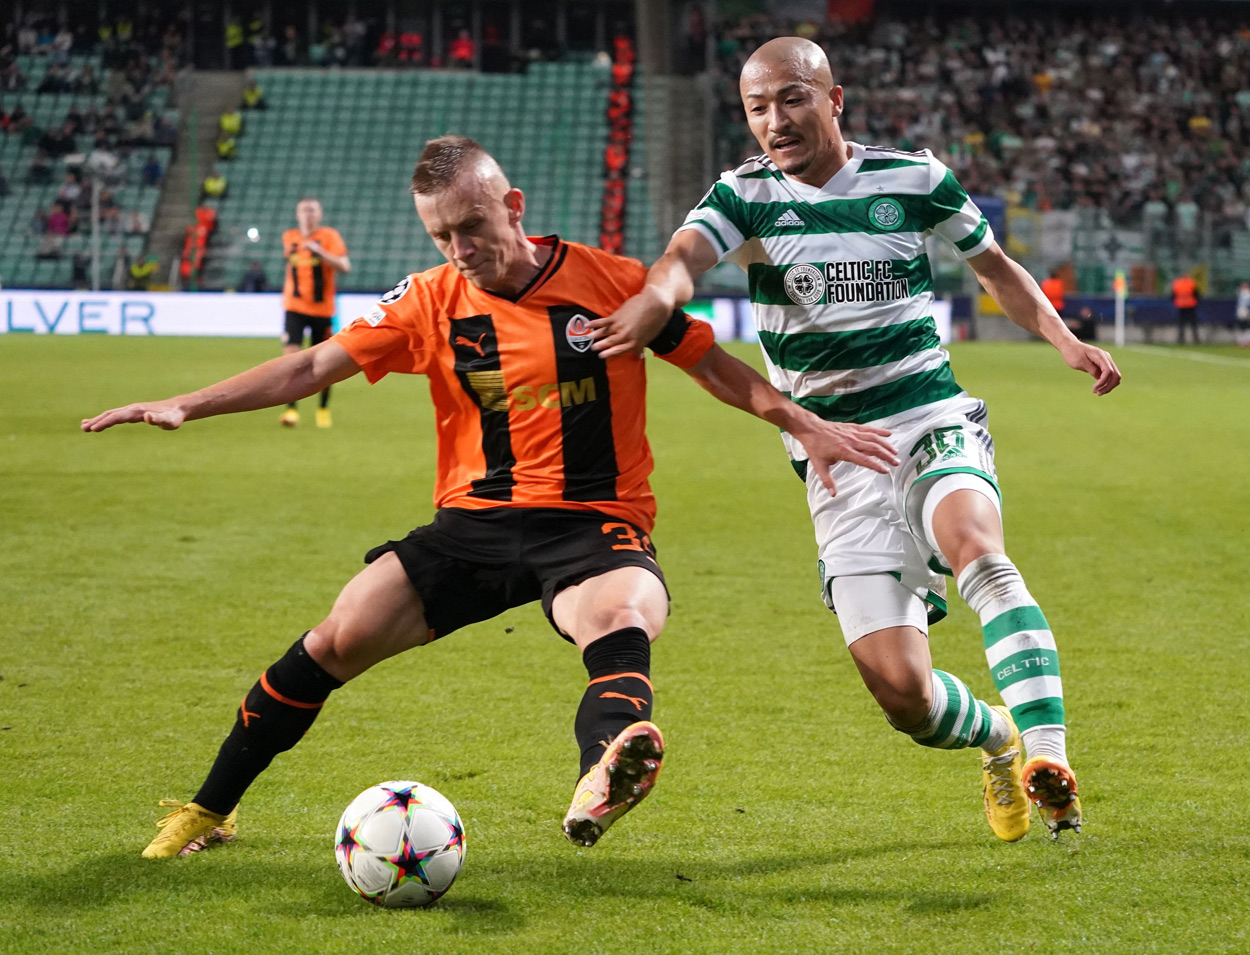 Celtic vs Shakhtar: where to watch, online streaming